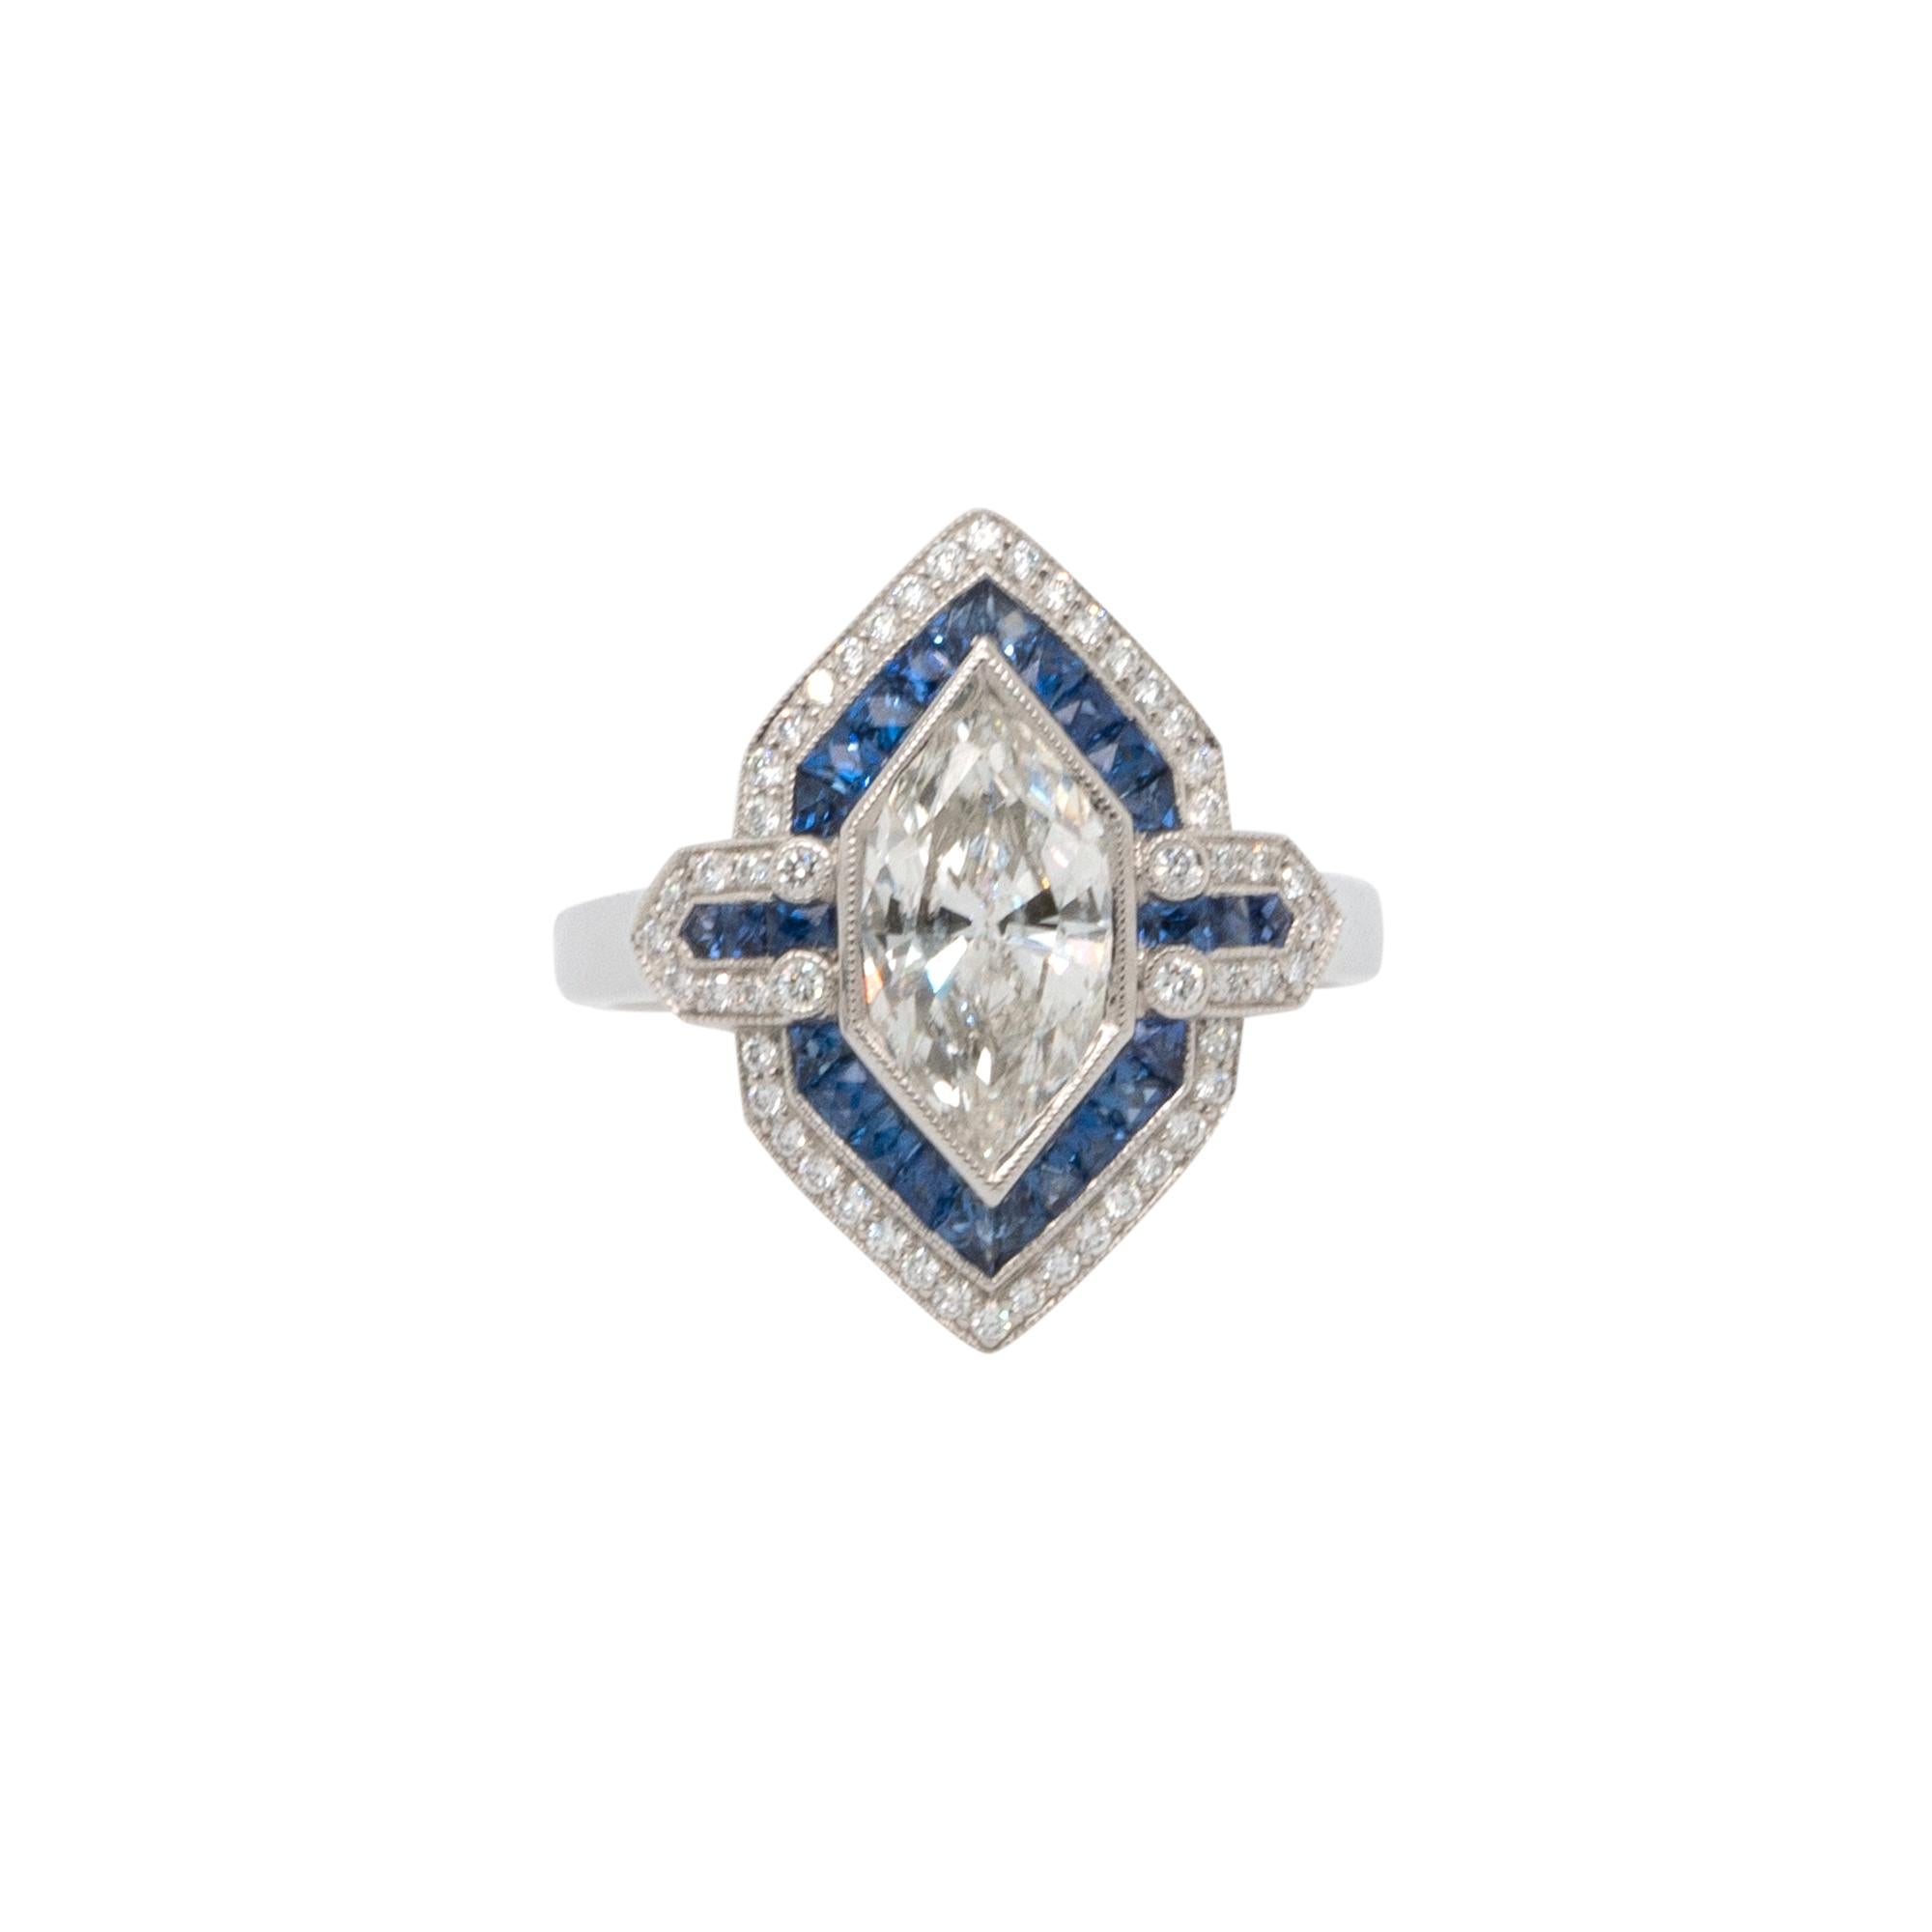 Center Details: 1.32ct Natural Marquise Cut Diamond that is J in color and SI2 in clarity

Ring Material: Platinum

Ring Details: Shield style ring with 0.19ctw of round cut Diamonds that are G/H in color and VS in clarity as well as 0.60ctw of